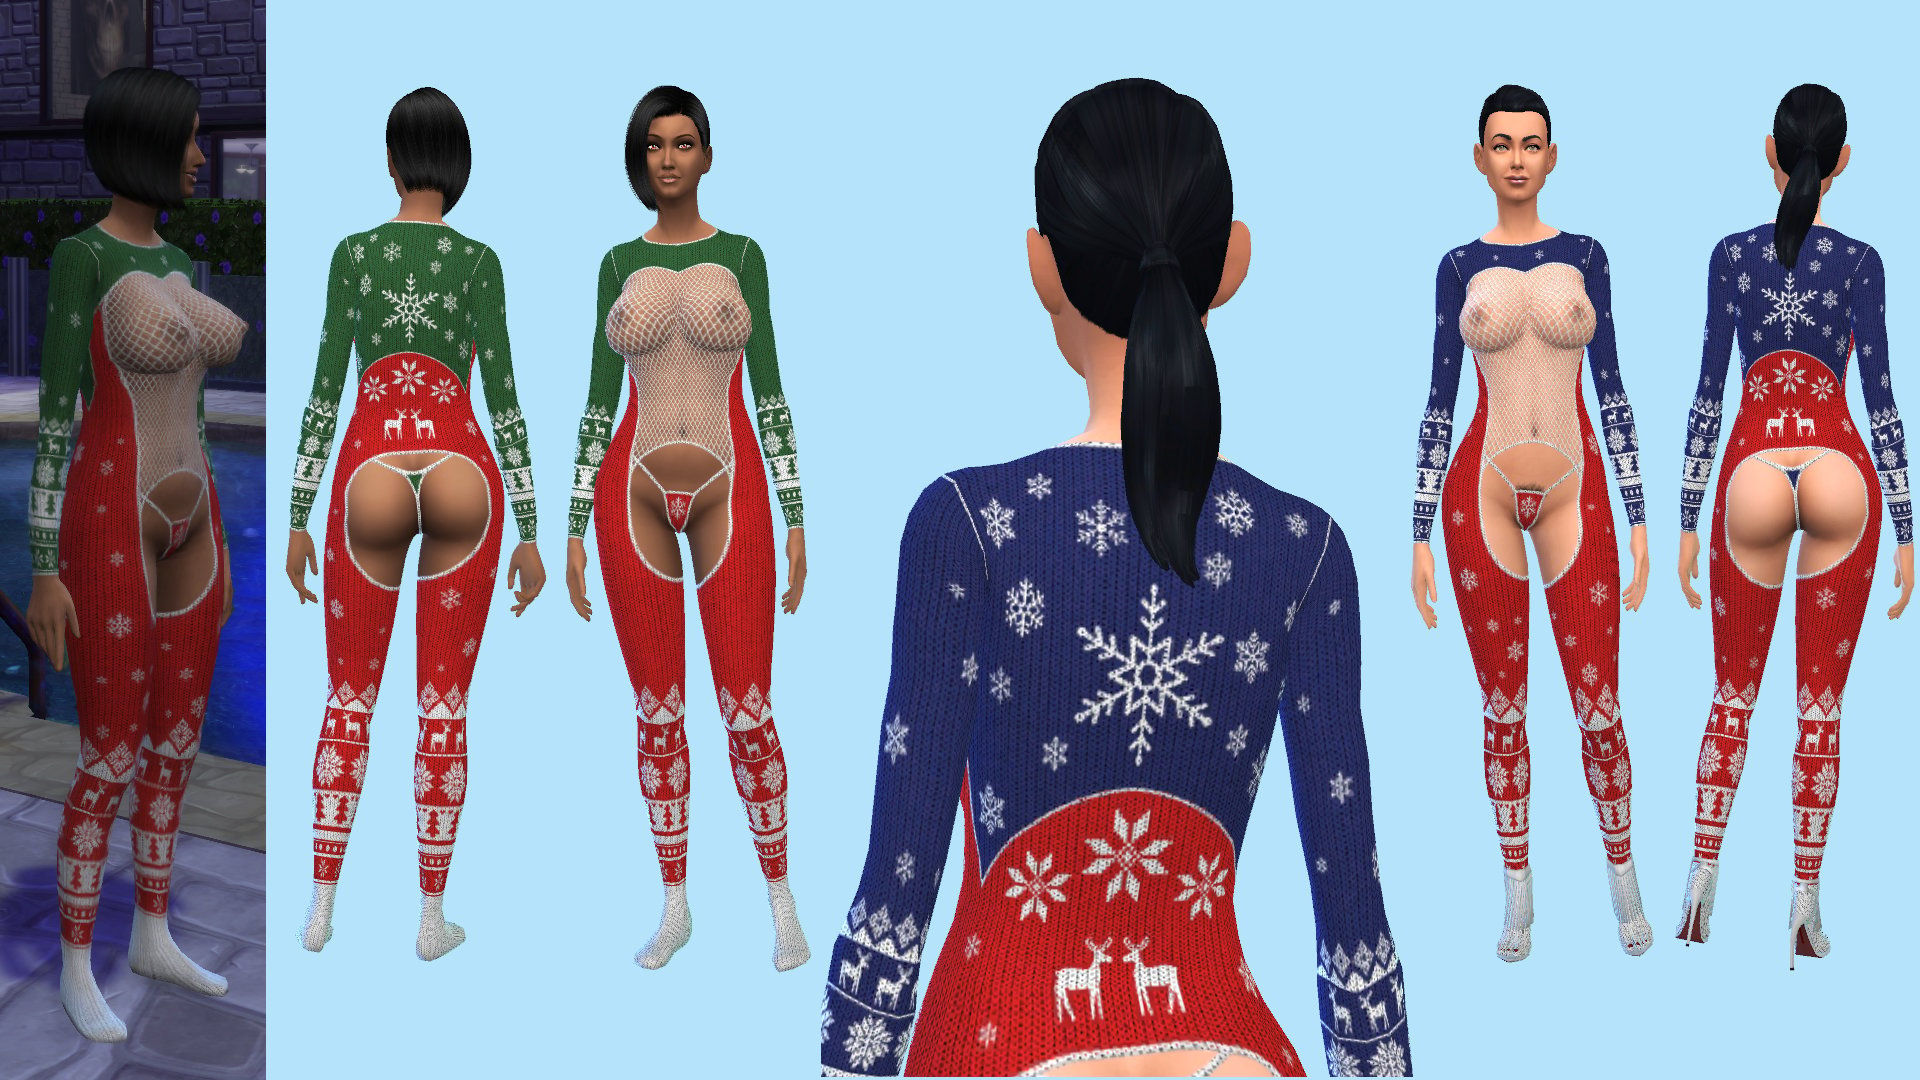 Sims 4 sexy clothing mods